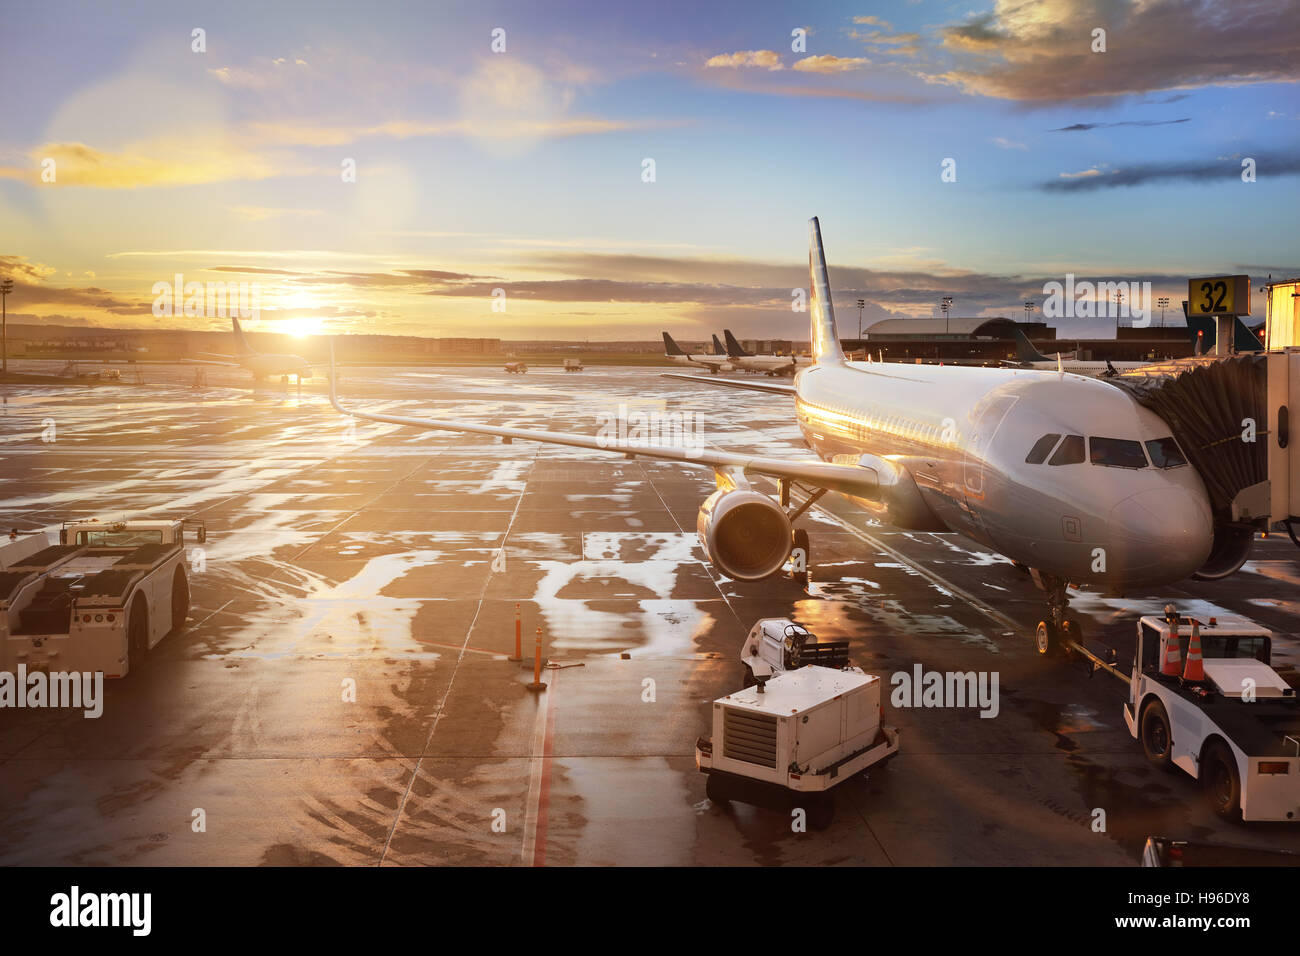 Airplane at terminal gate in international airport Stock Photo